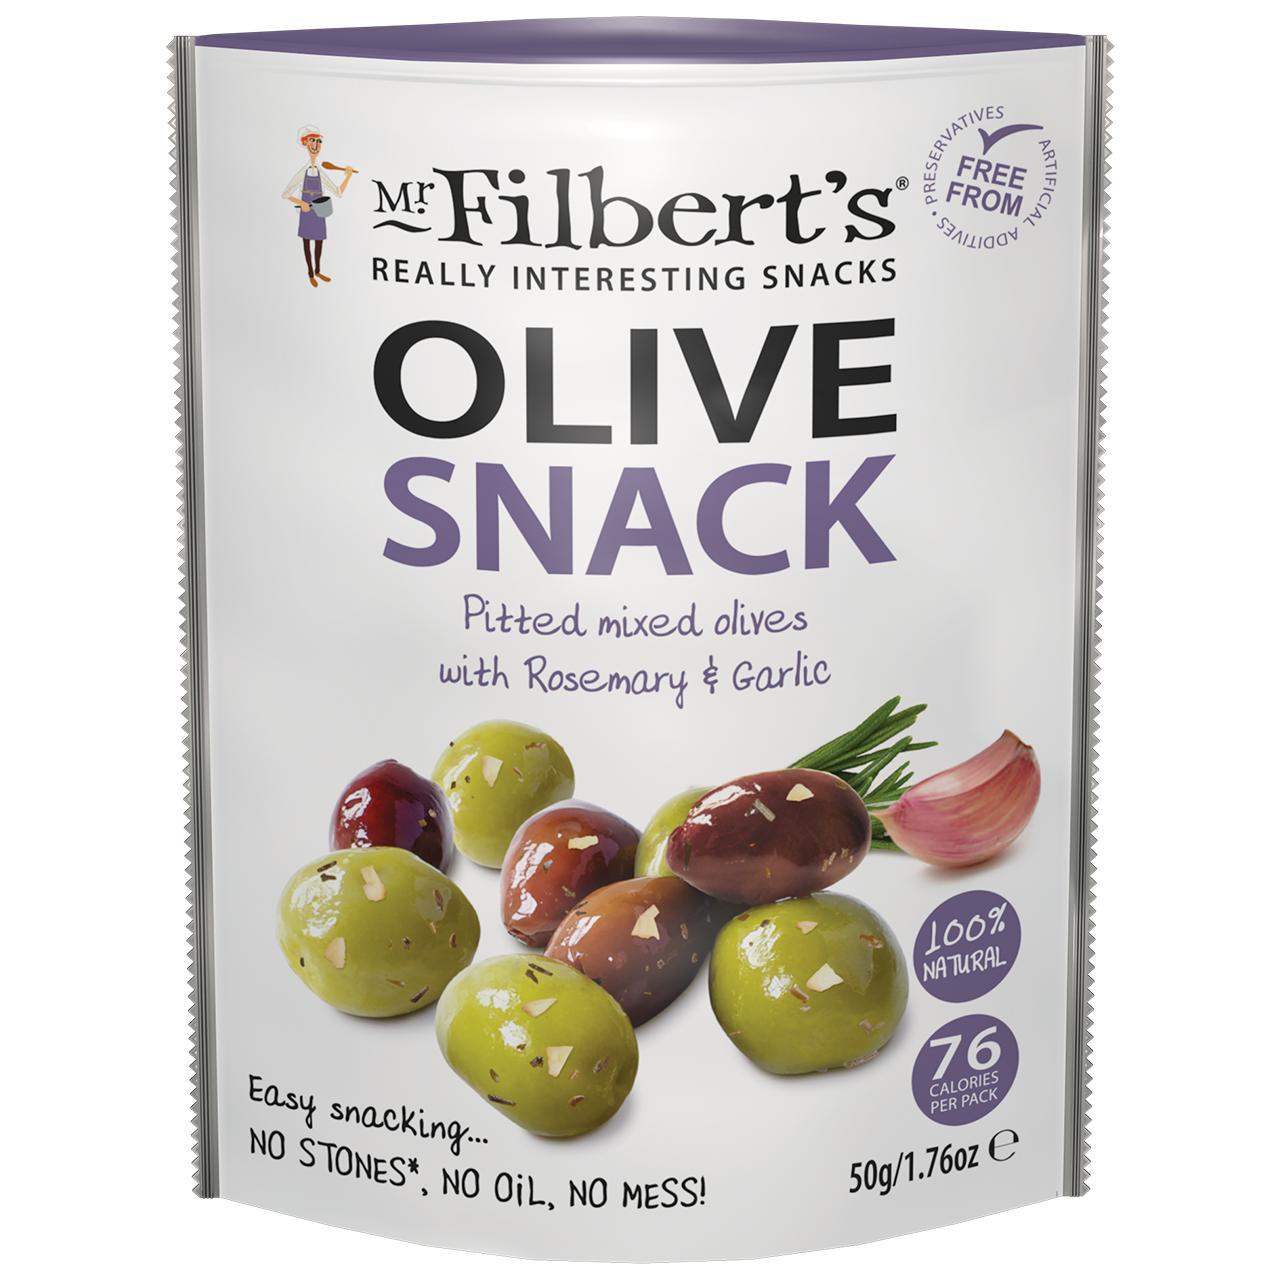 Mr Filberts Olive Snacks Mixed Olives with Rosemary & Garlic